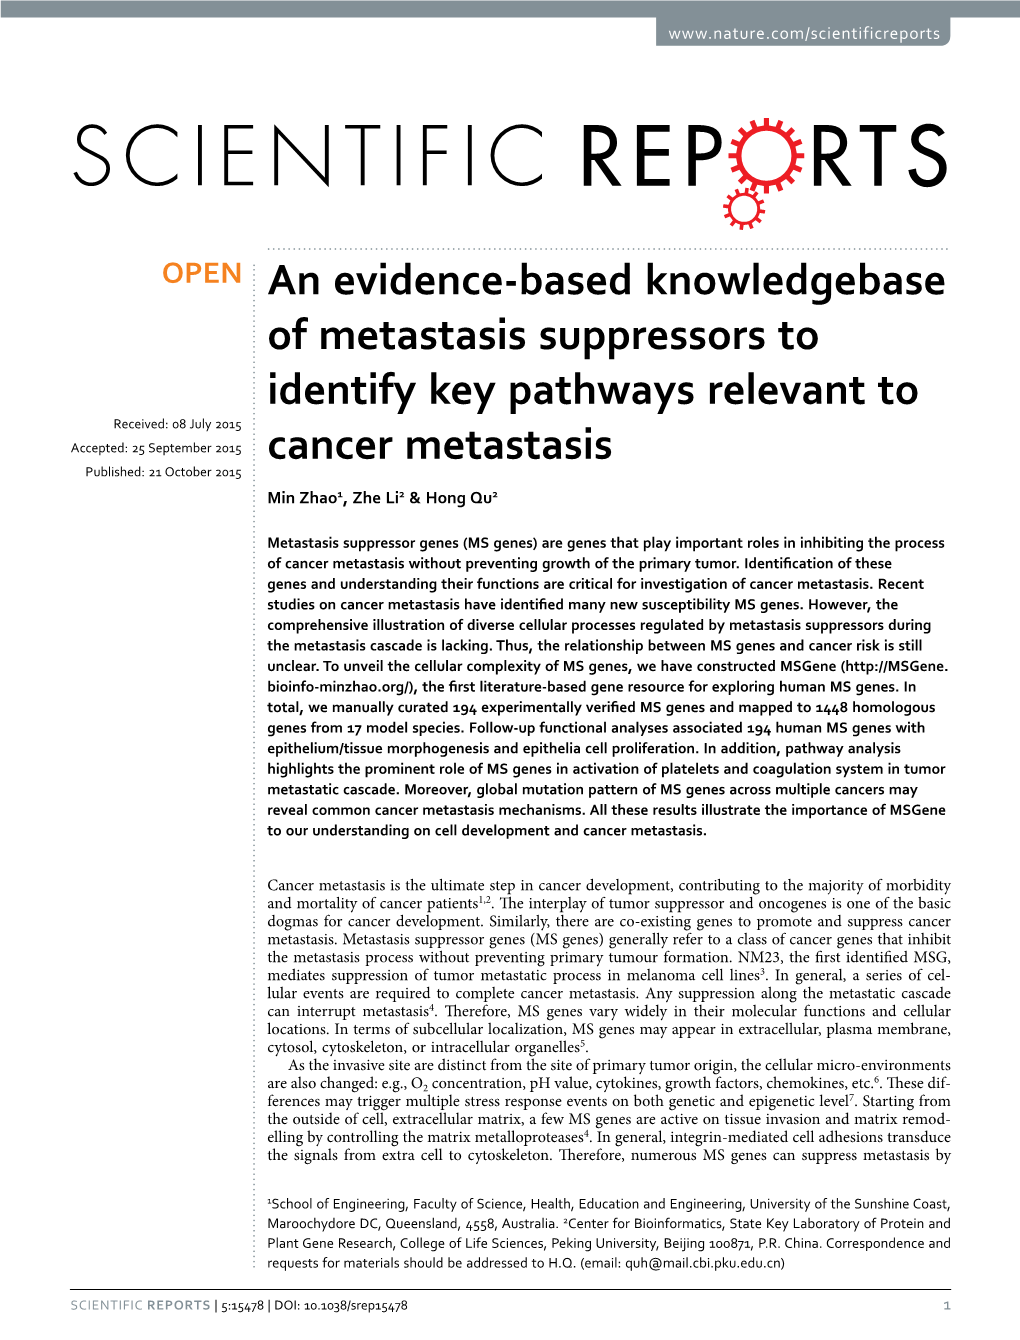 An Evidence-Based Knowledgebase of Metastasis Suppressors to Identify